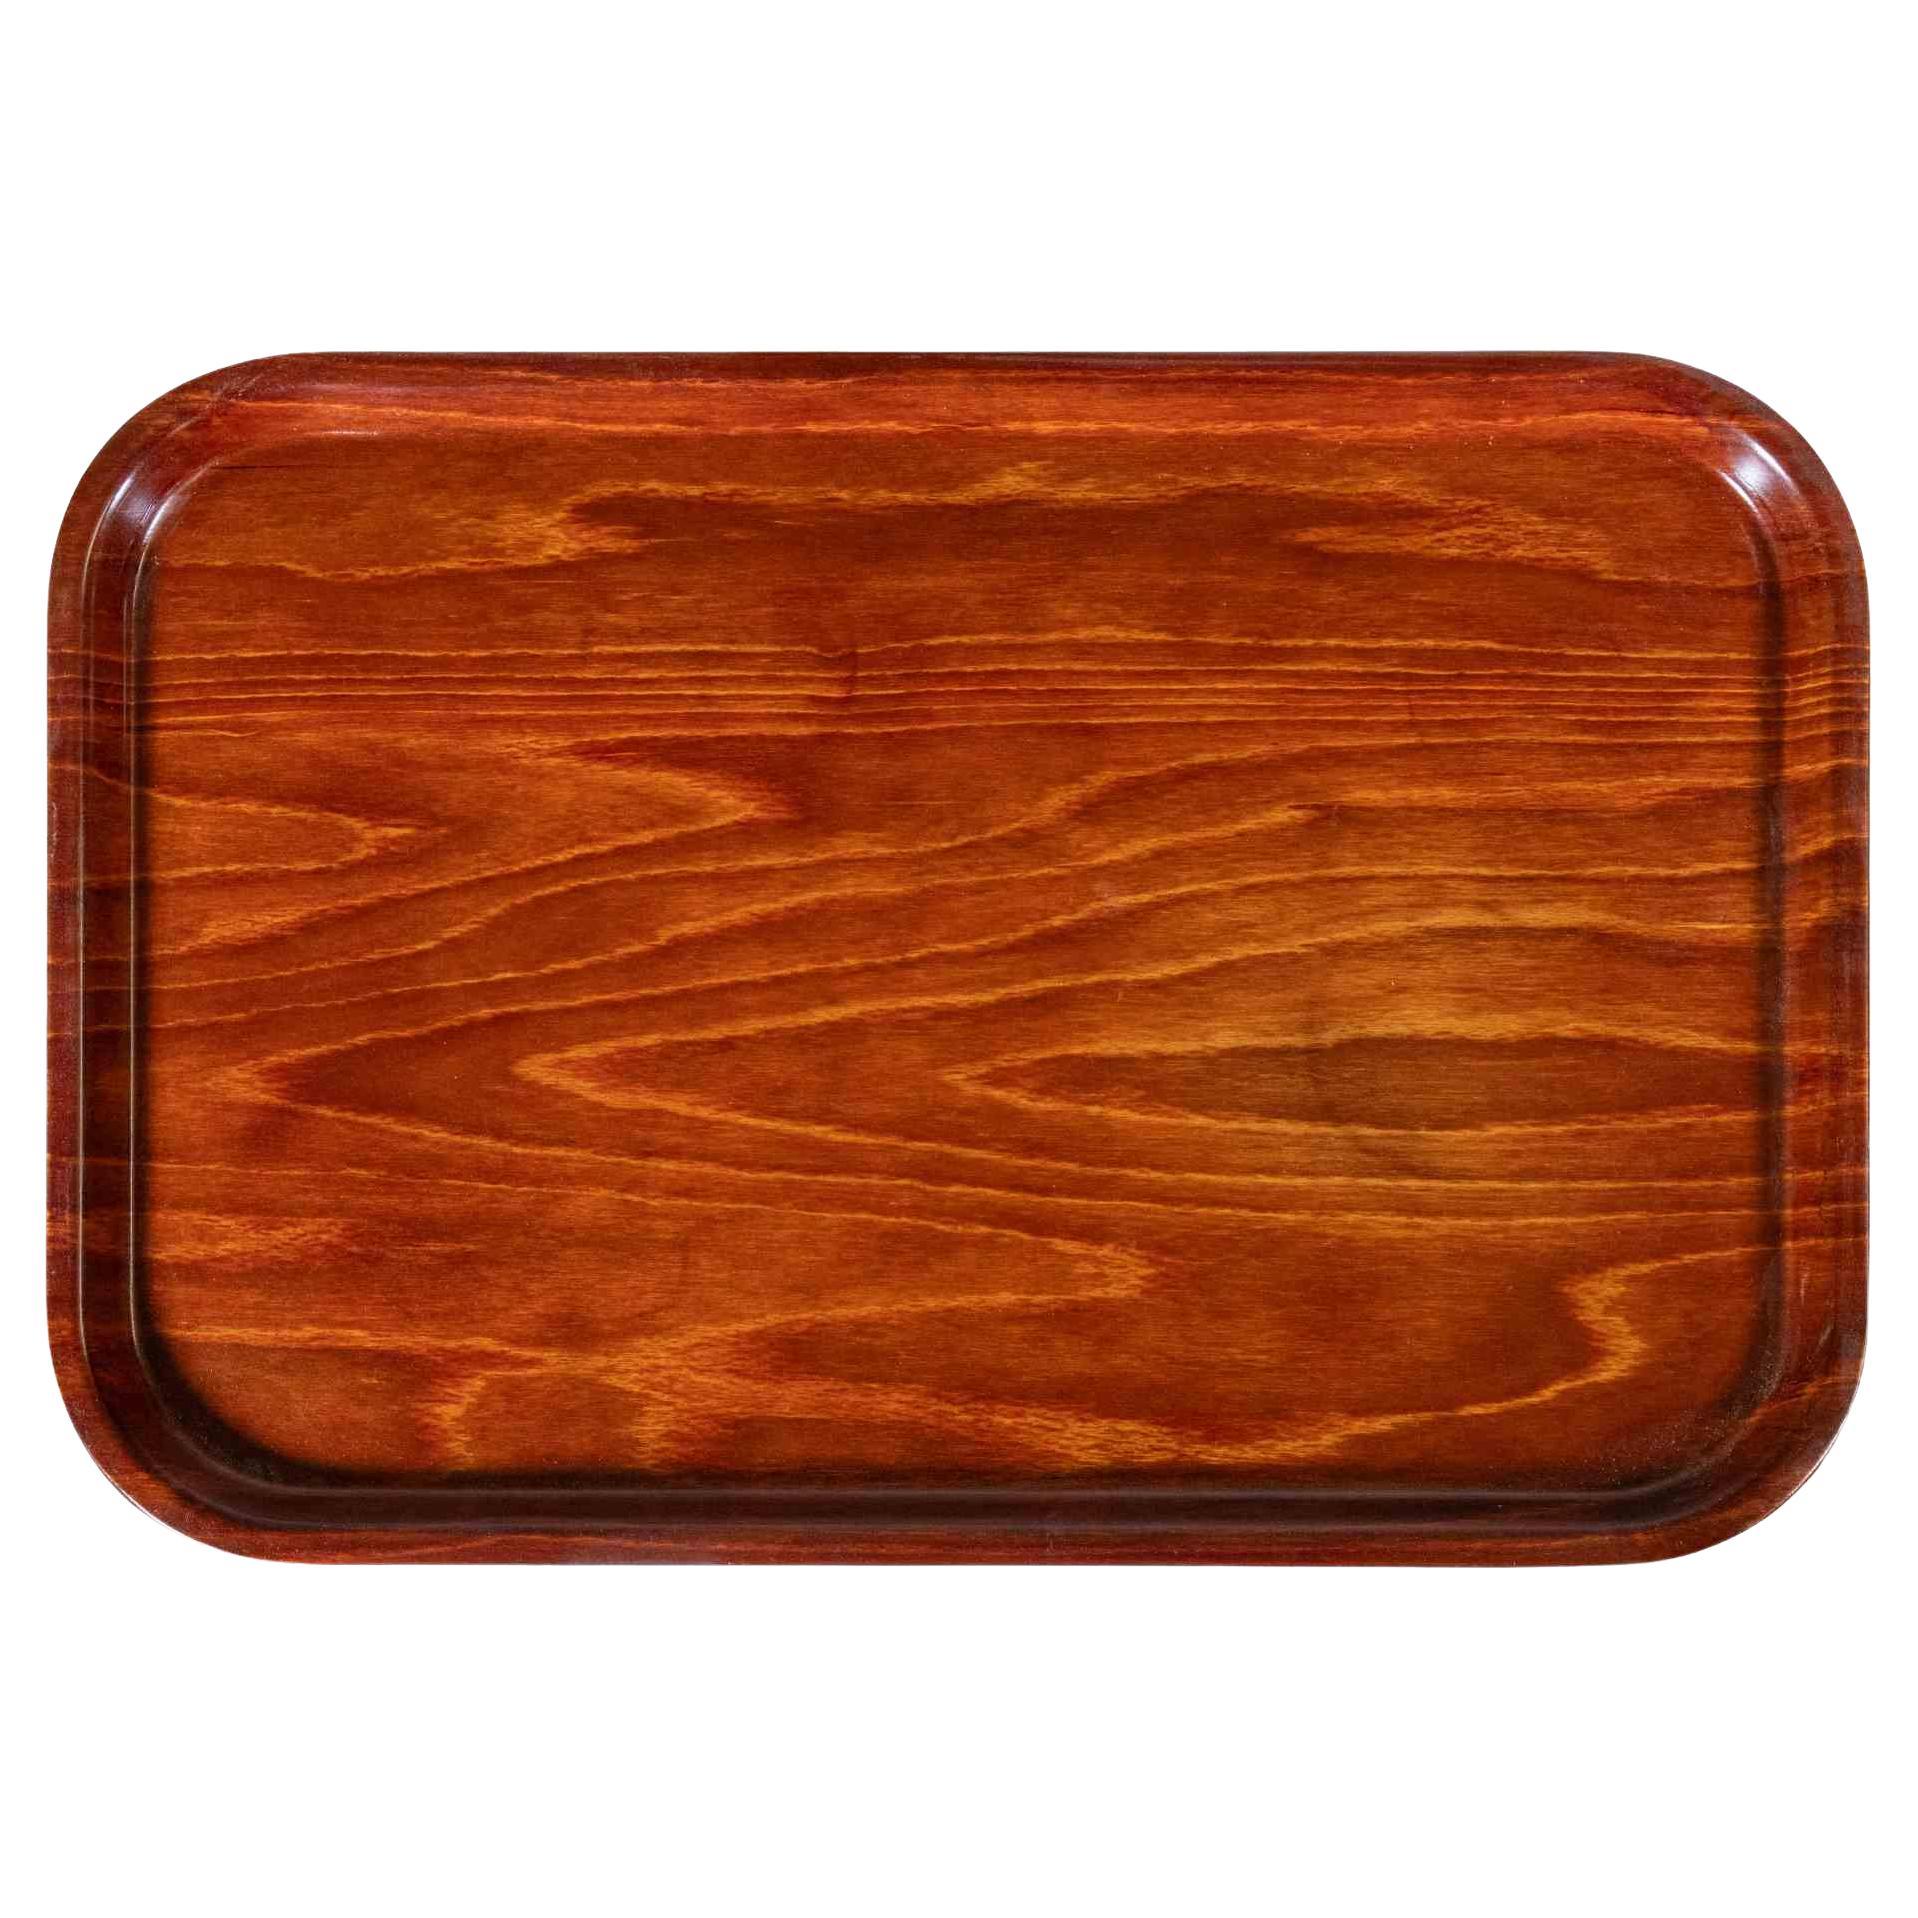 Laminated Vintage Tray by Gerling Sol-Ohligs, Italy, Mid-20th Century For Sale